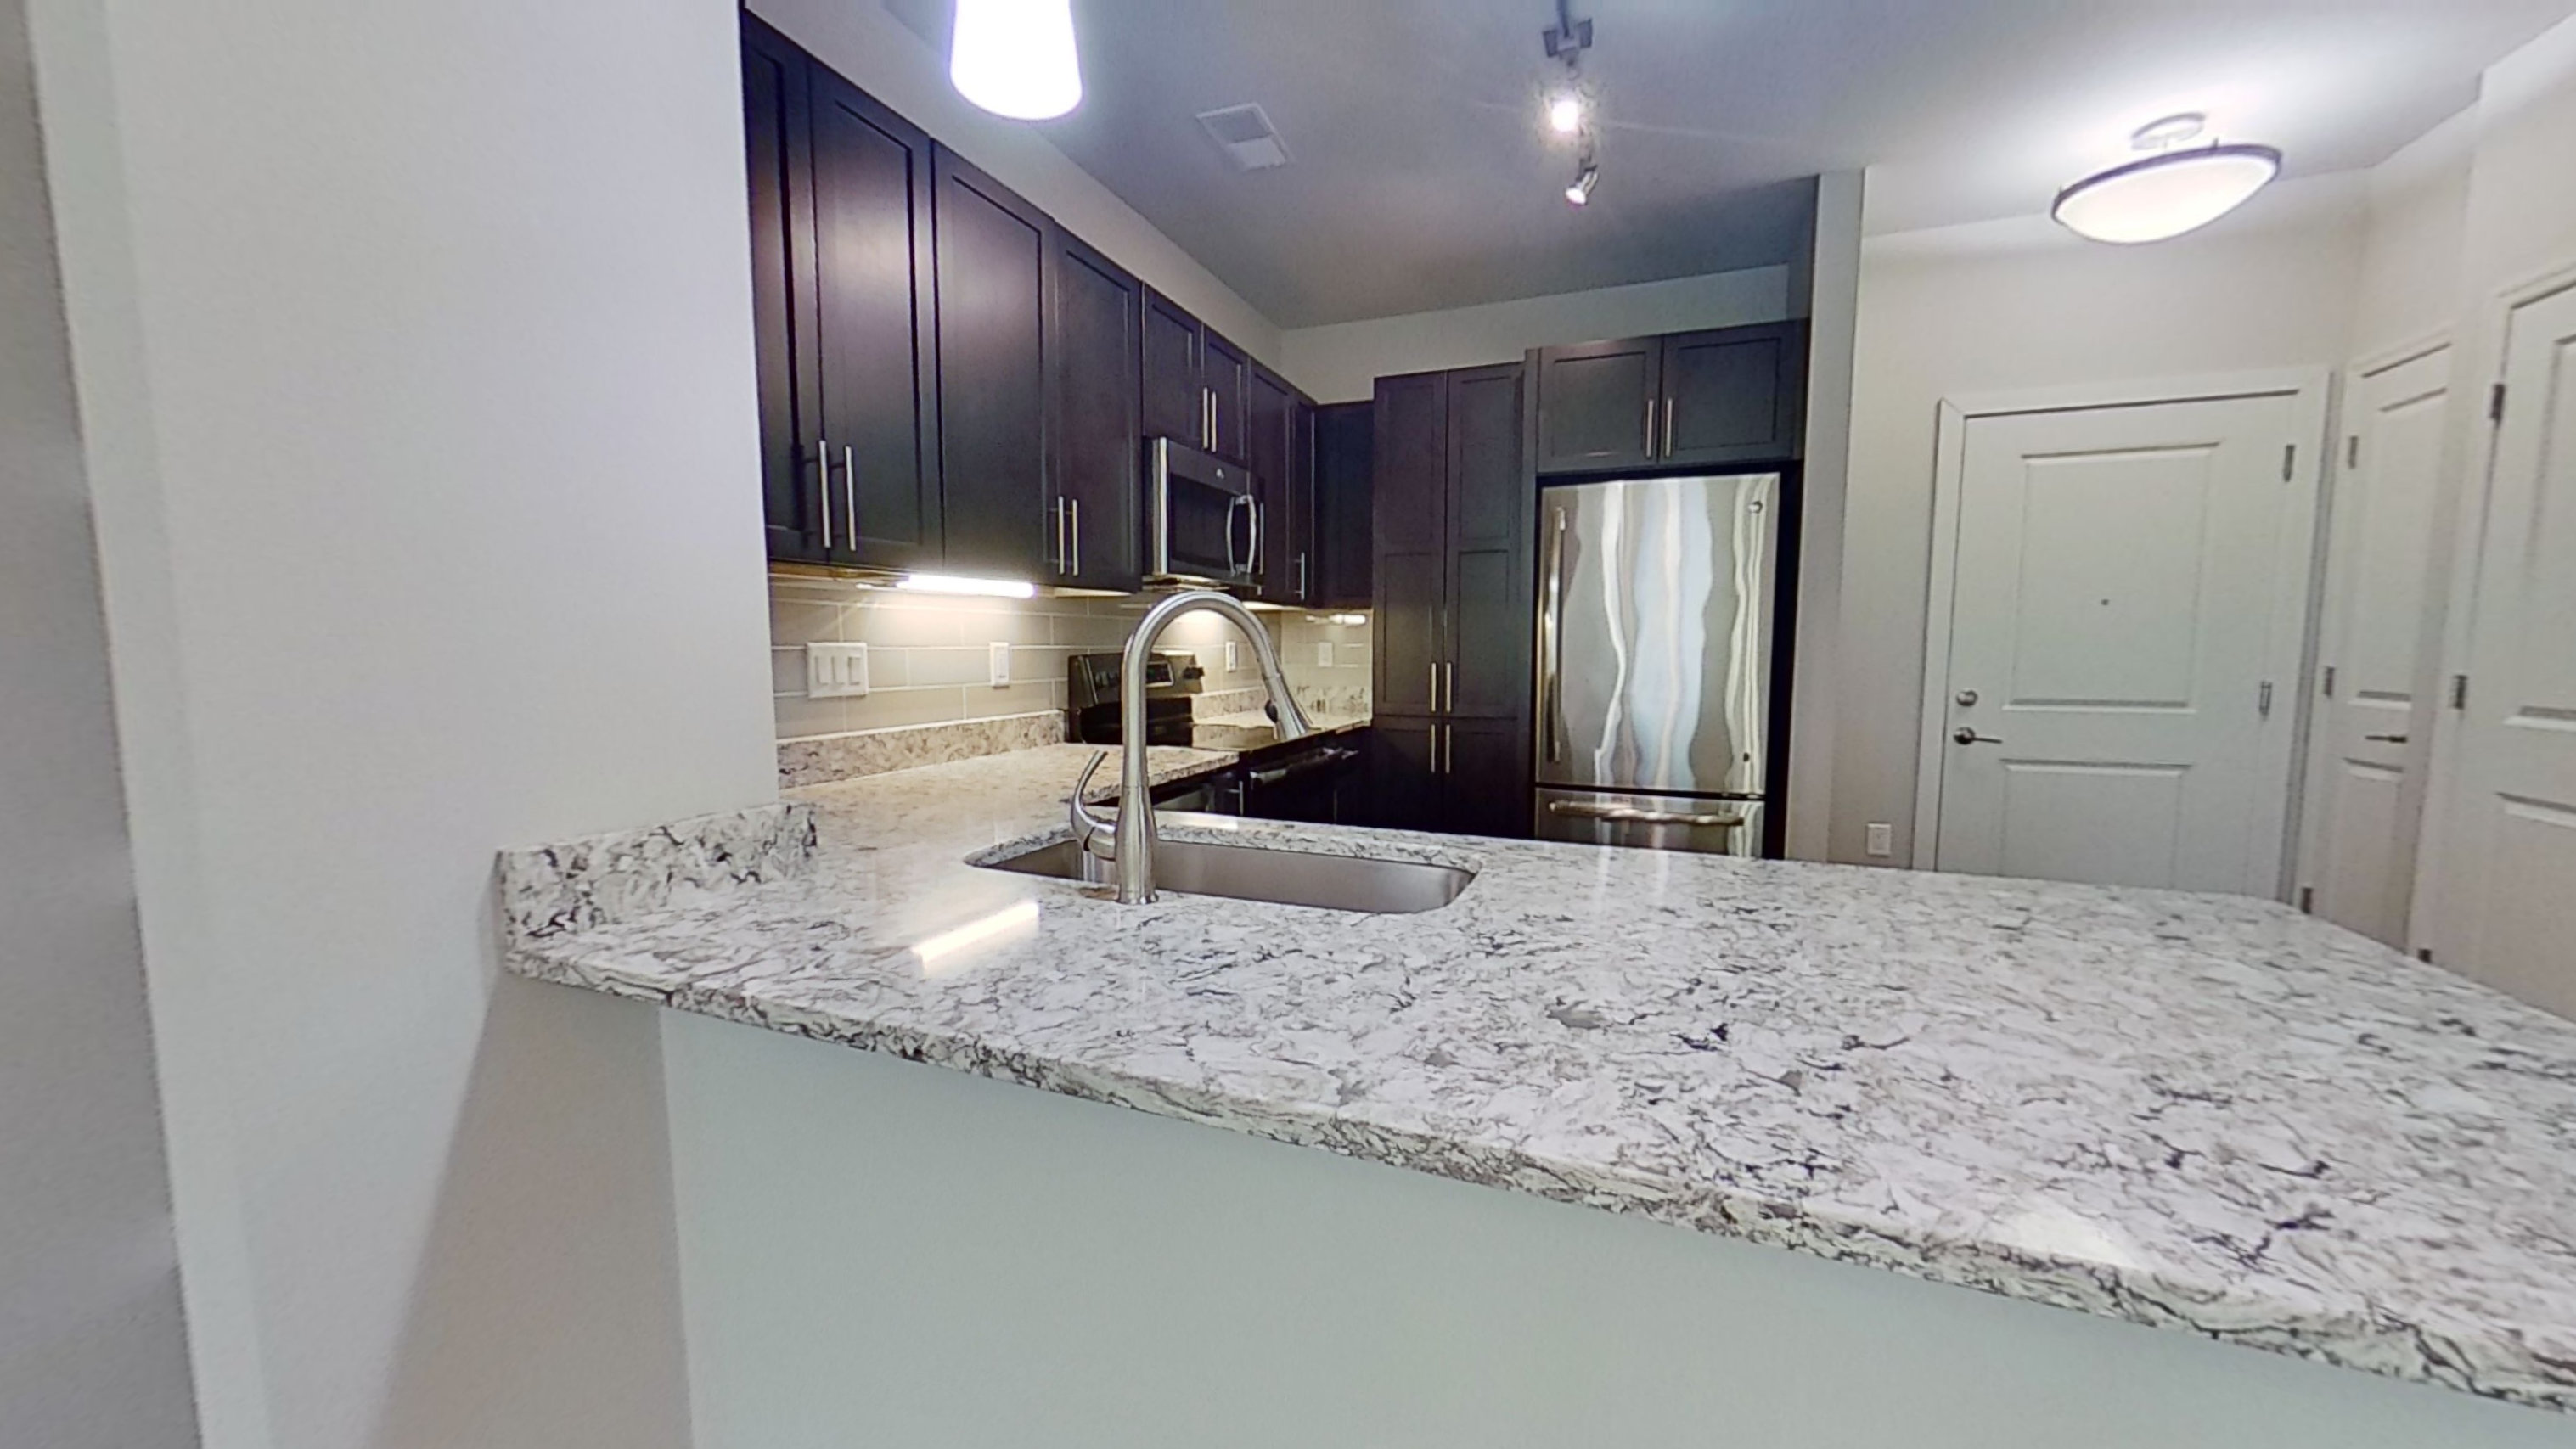 A2 Unit Kitchen at the Vue at Creve Coeur Apartments in Creve Coeur, MO